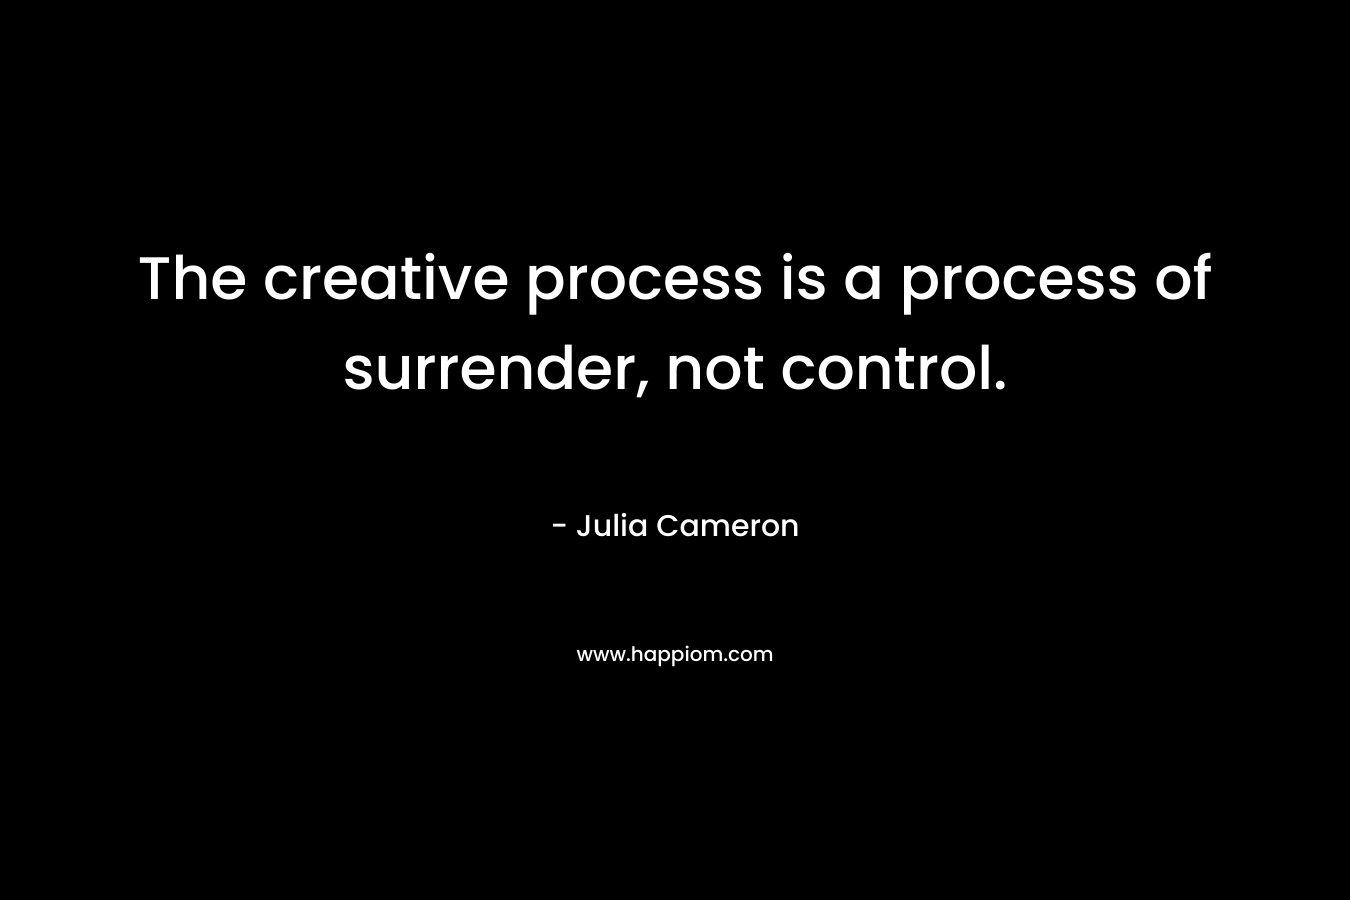 The creative process is a process of surrender, not control. – Julia Cameron